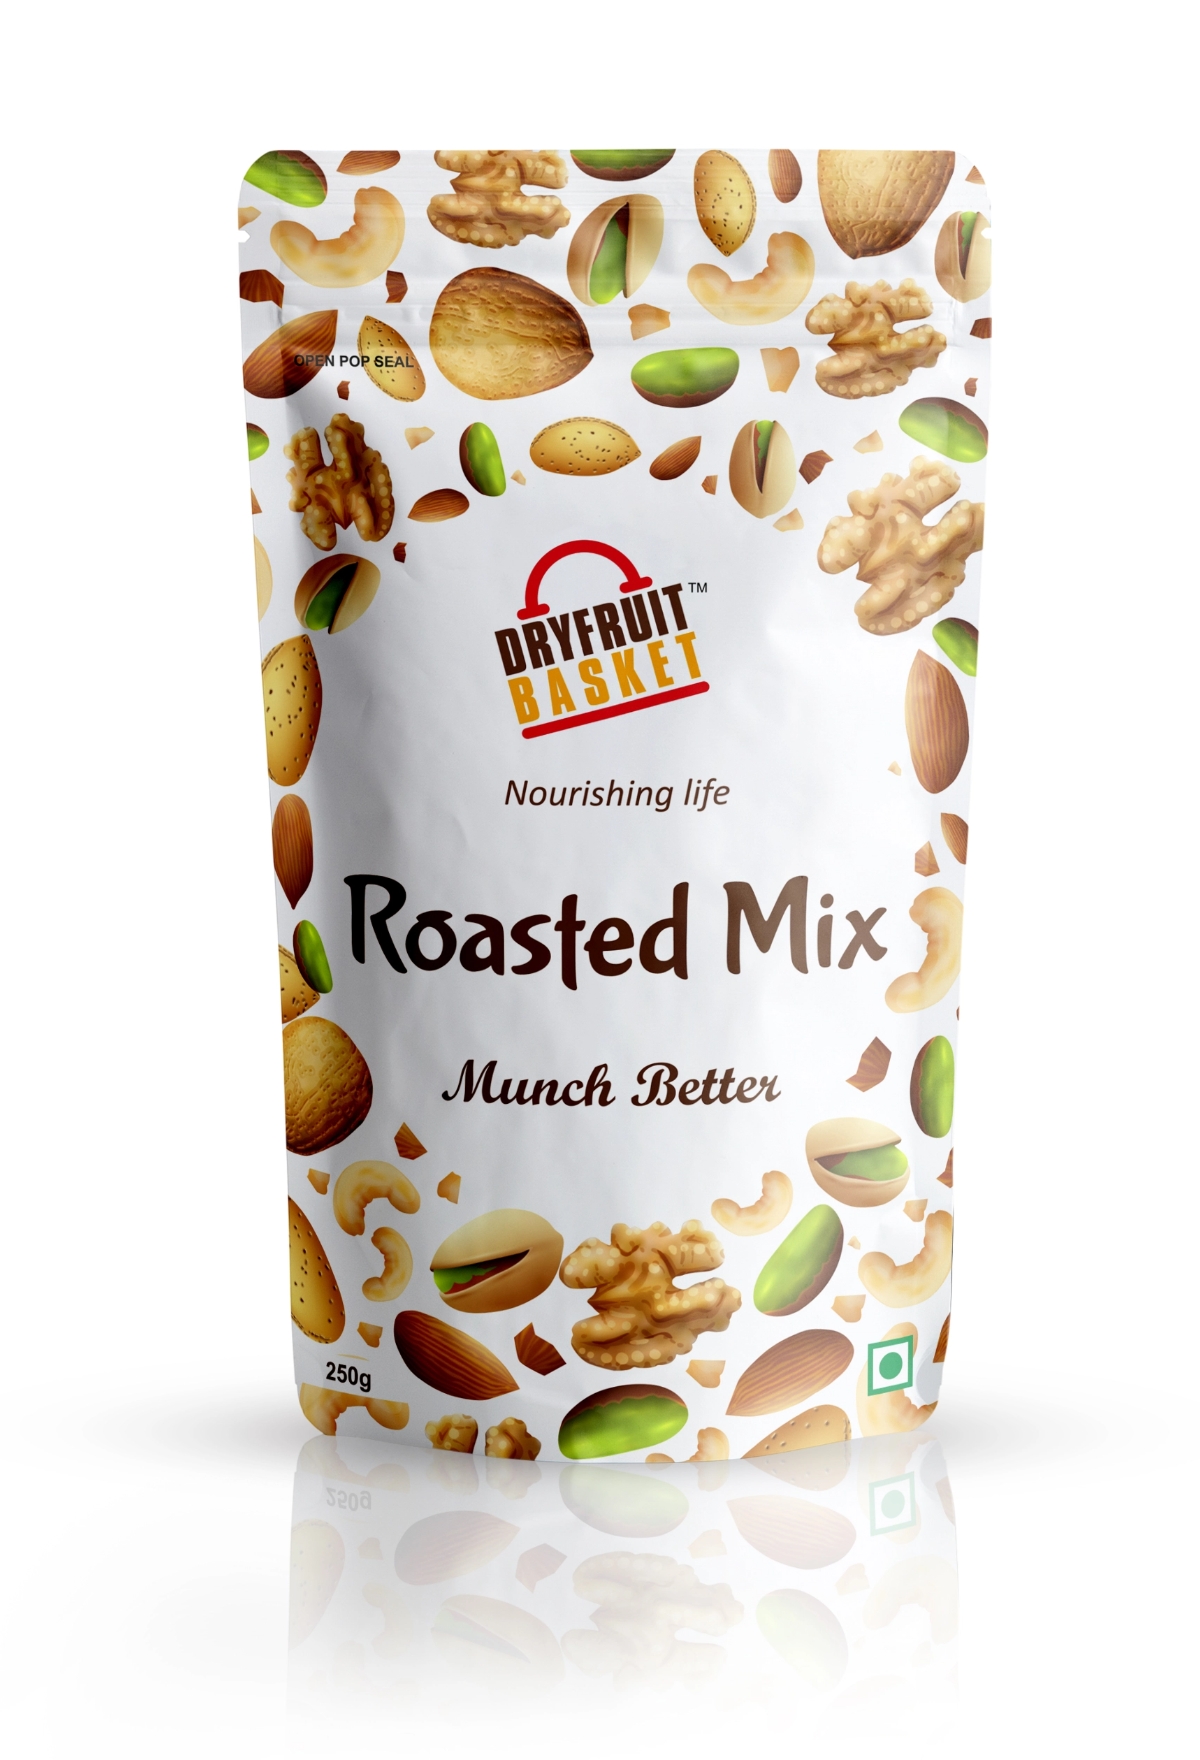 Buy Roasted Mix Online